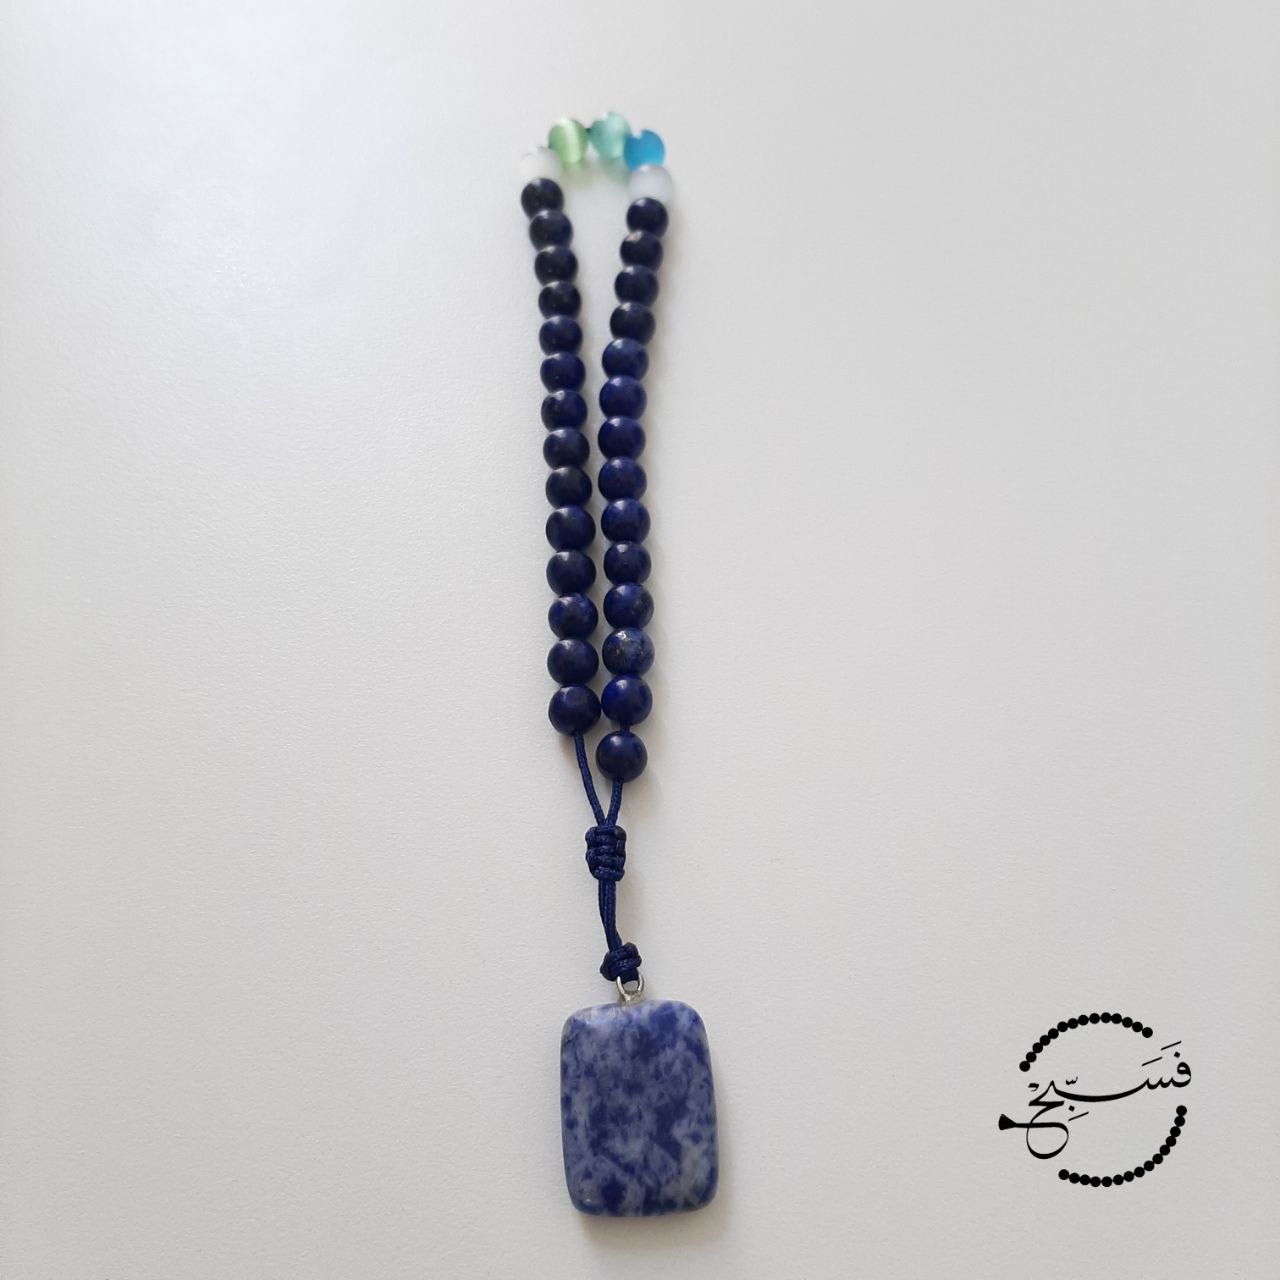 Lapis Lazuli and cat eye beads to match our popular lapis tasbih. Finished with a kyanite pendant.  Features an adjustable knot.  33 beads (6mm beads)